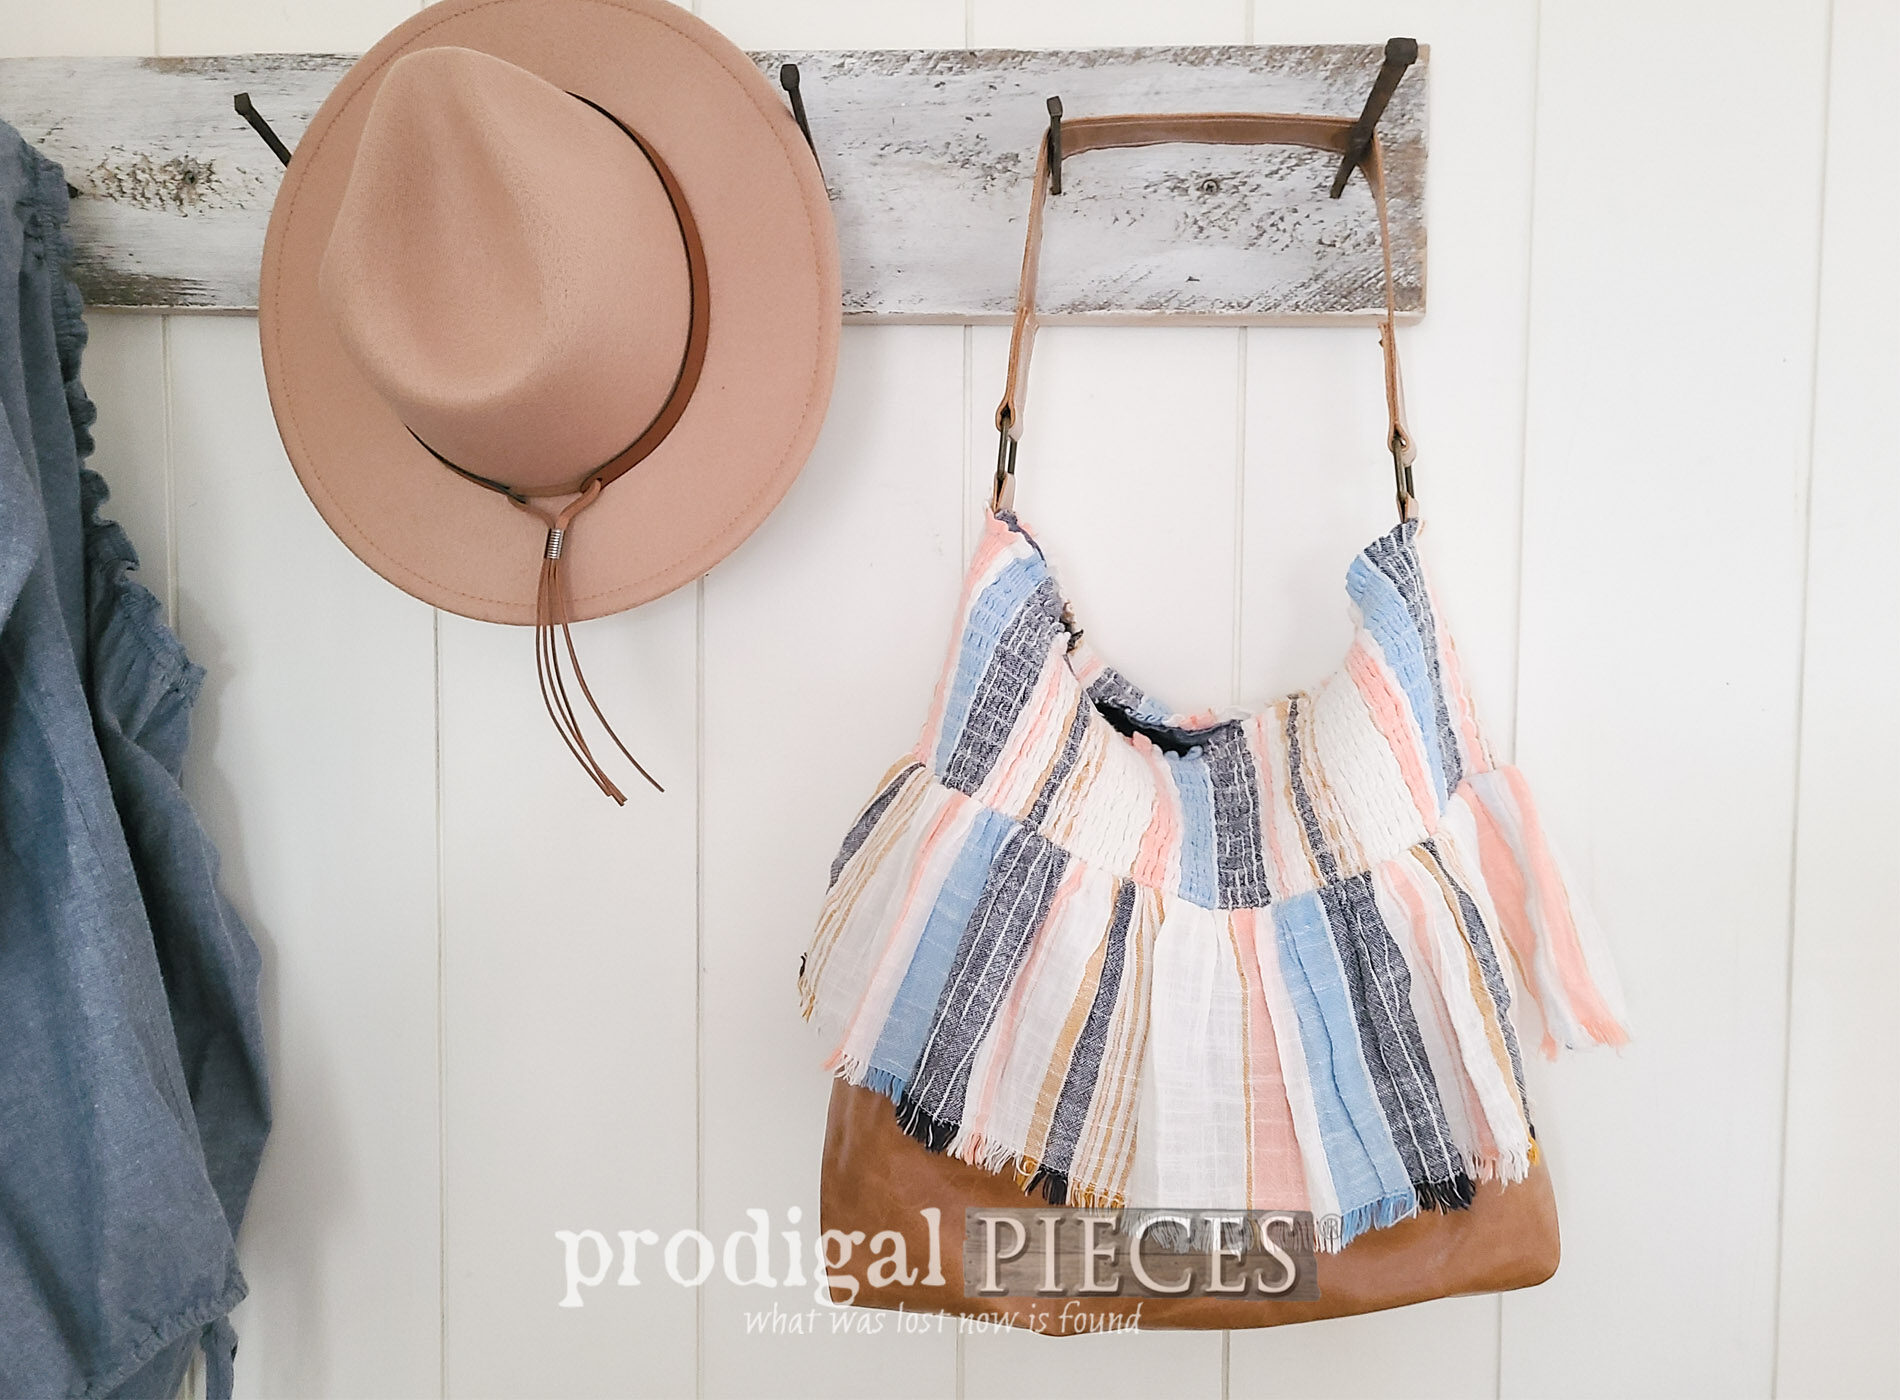 Featured DIY Boho Bag from Refashioned Skirt by Larissa of Prodigal Pieces | prodigalpieces.com #prodigalpieces #diy #boho #sewing #refashion